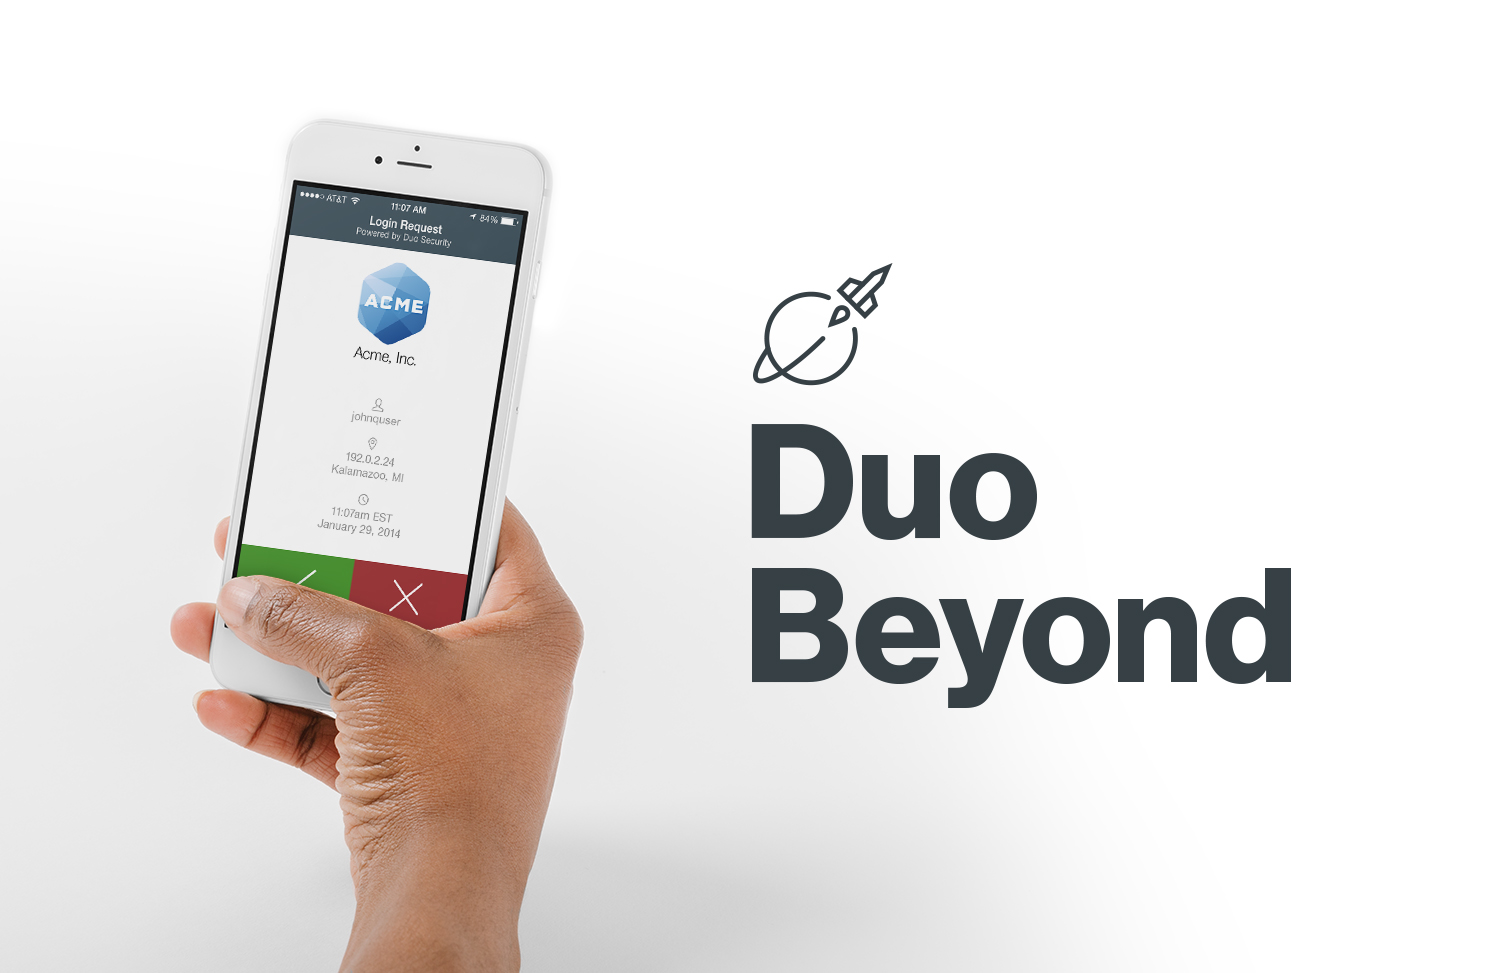 duo beyondcorp and aws